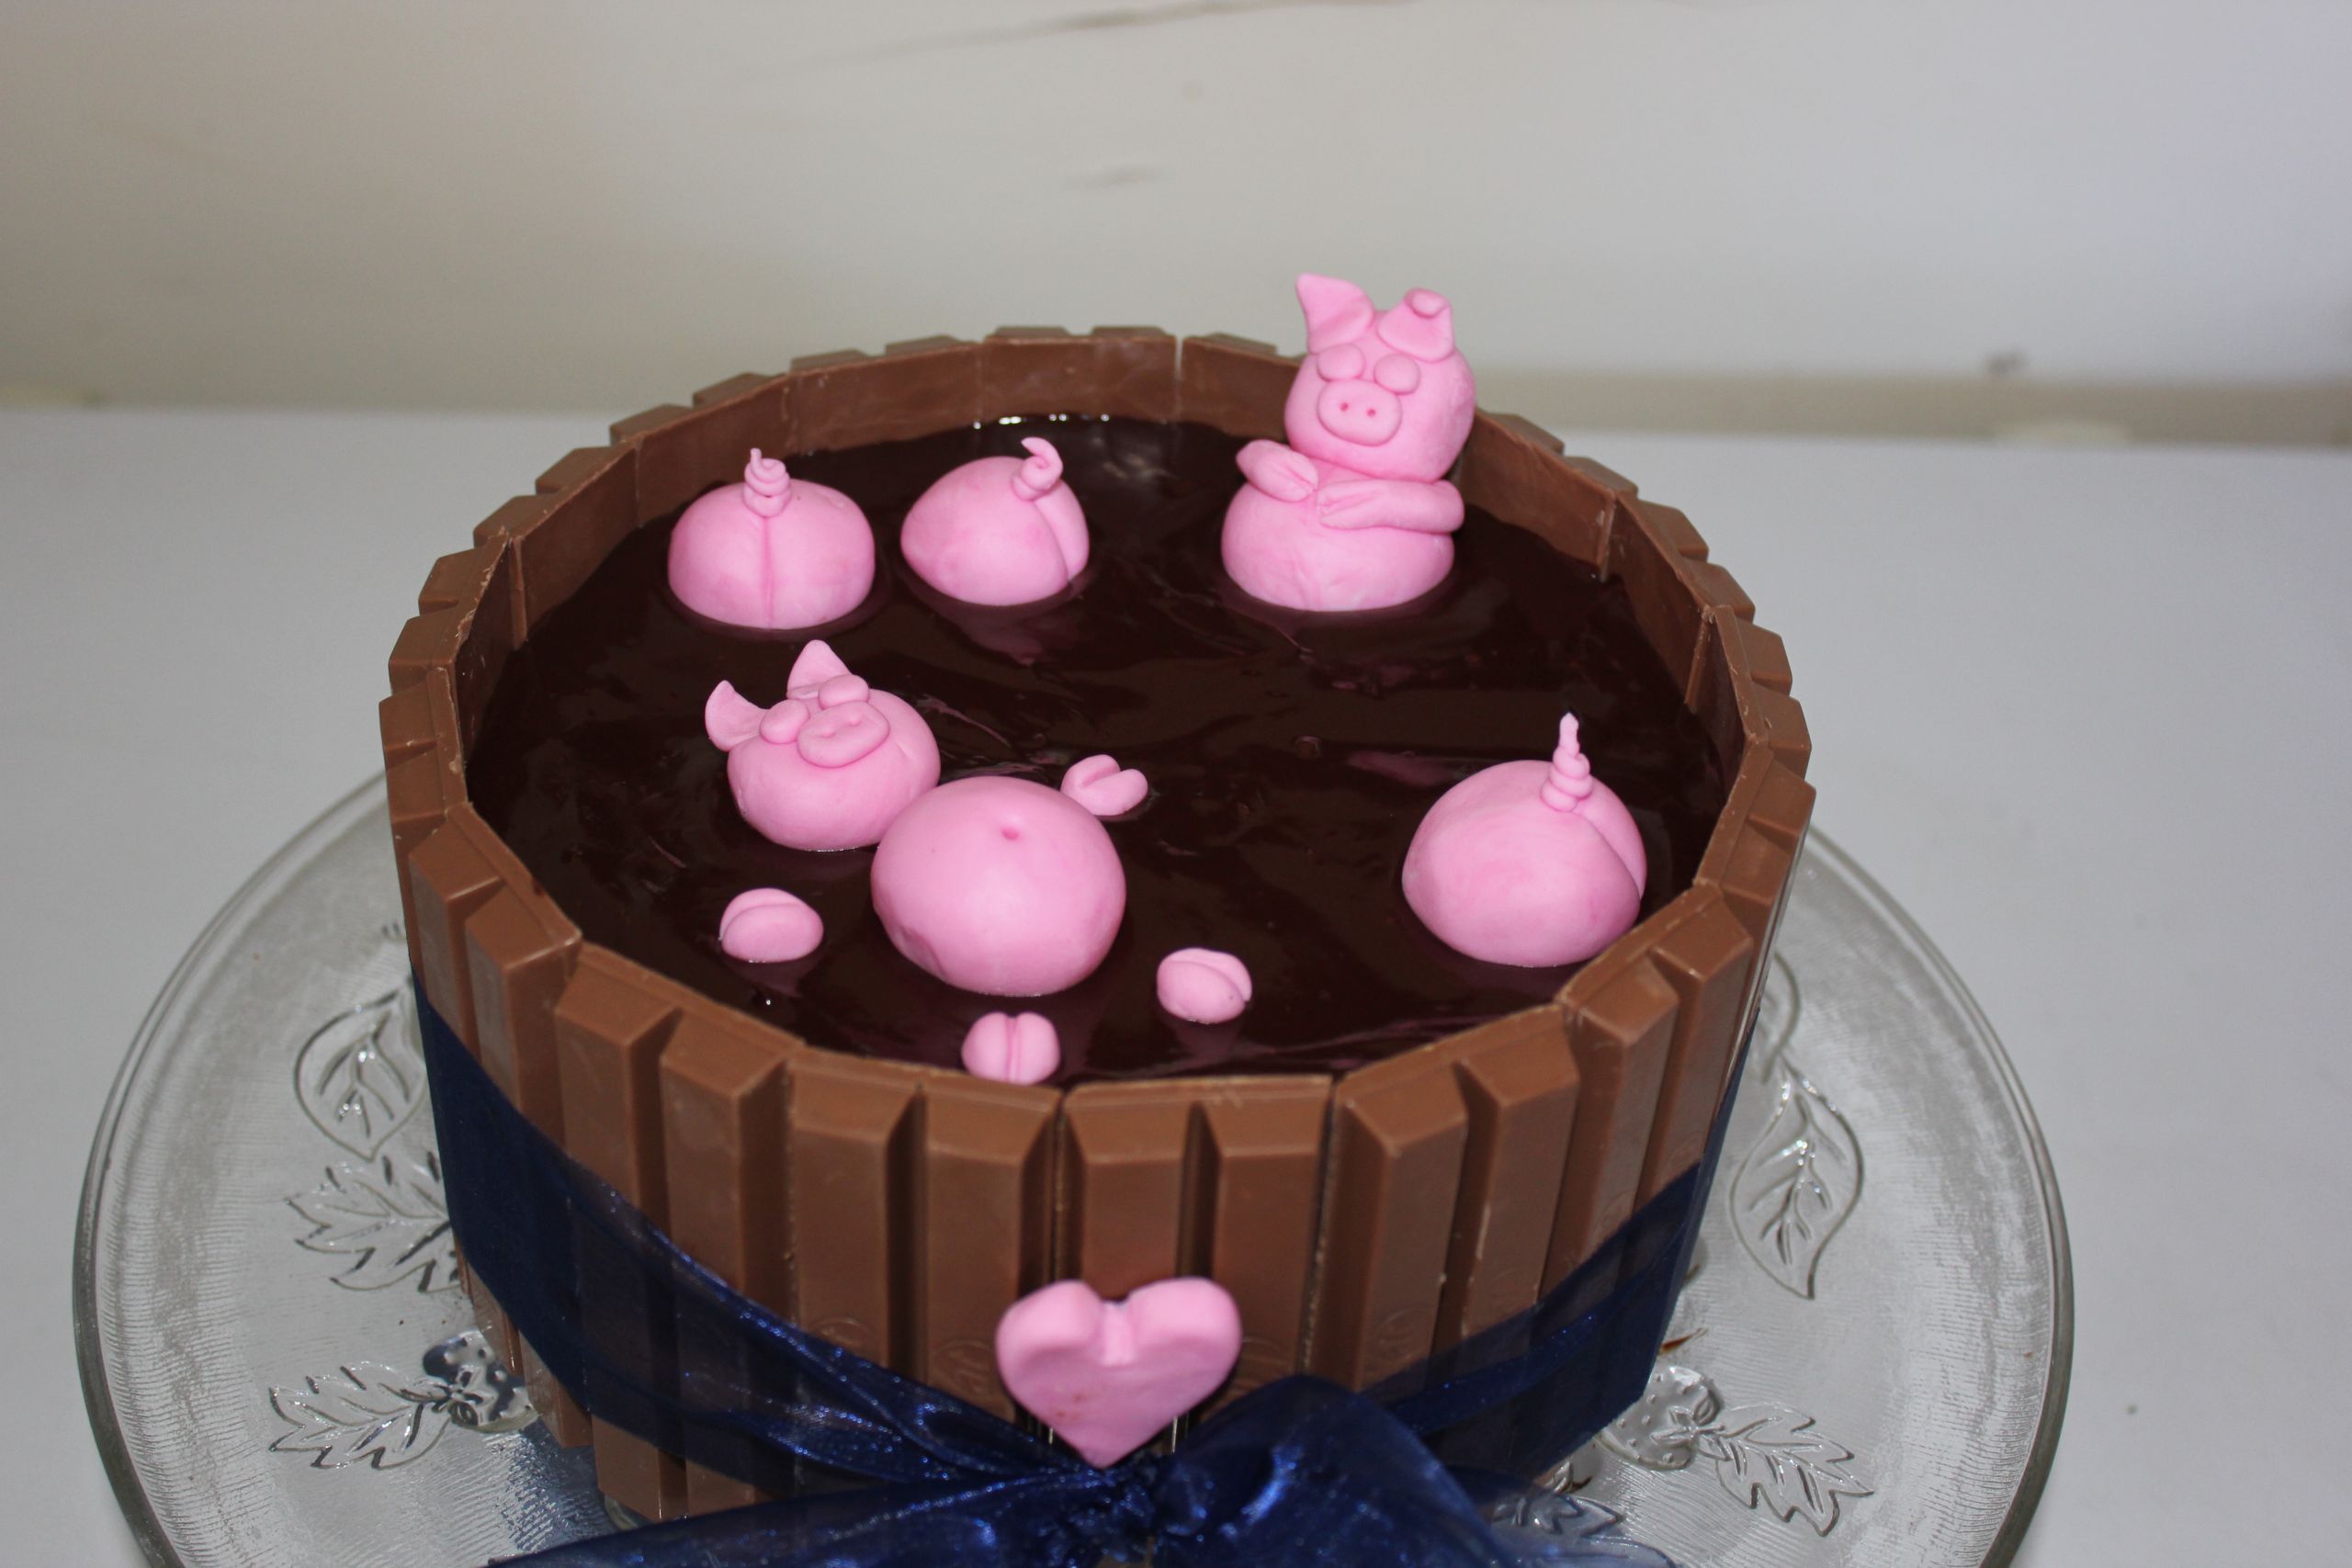 Pig Birthday Cake
 Would you believe more pig cakes